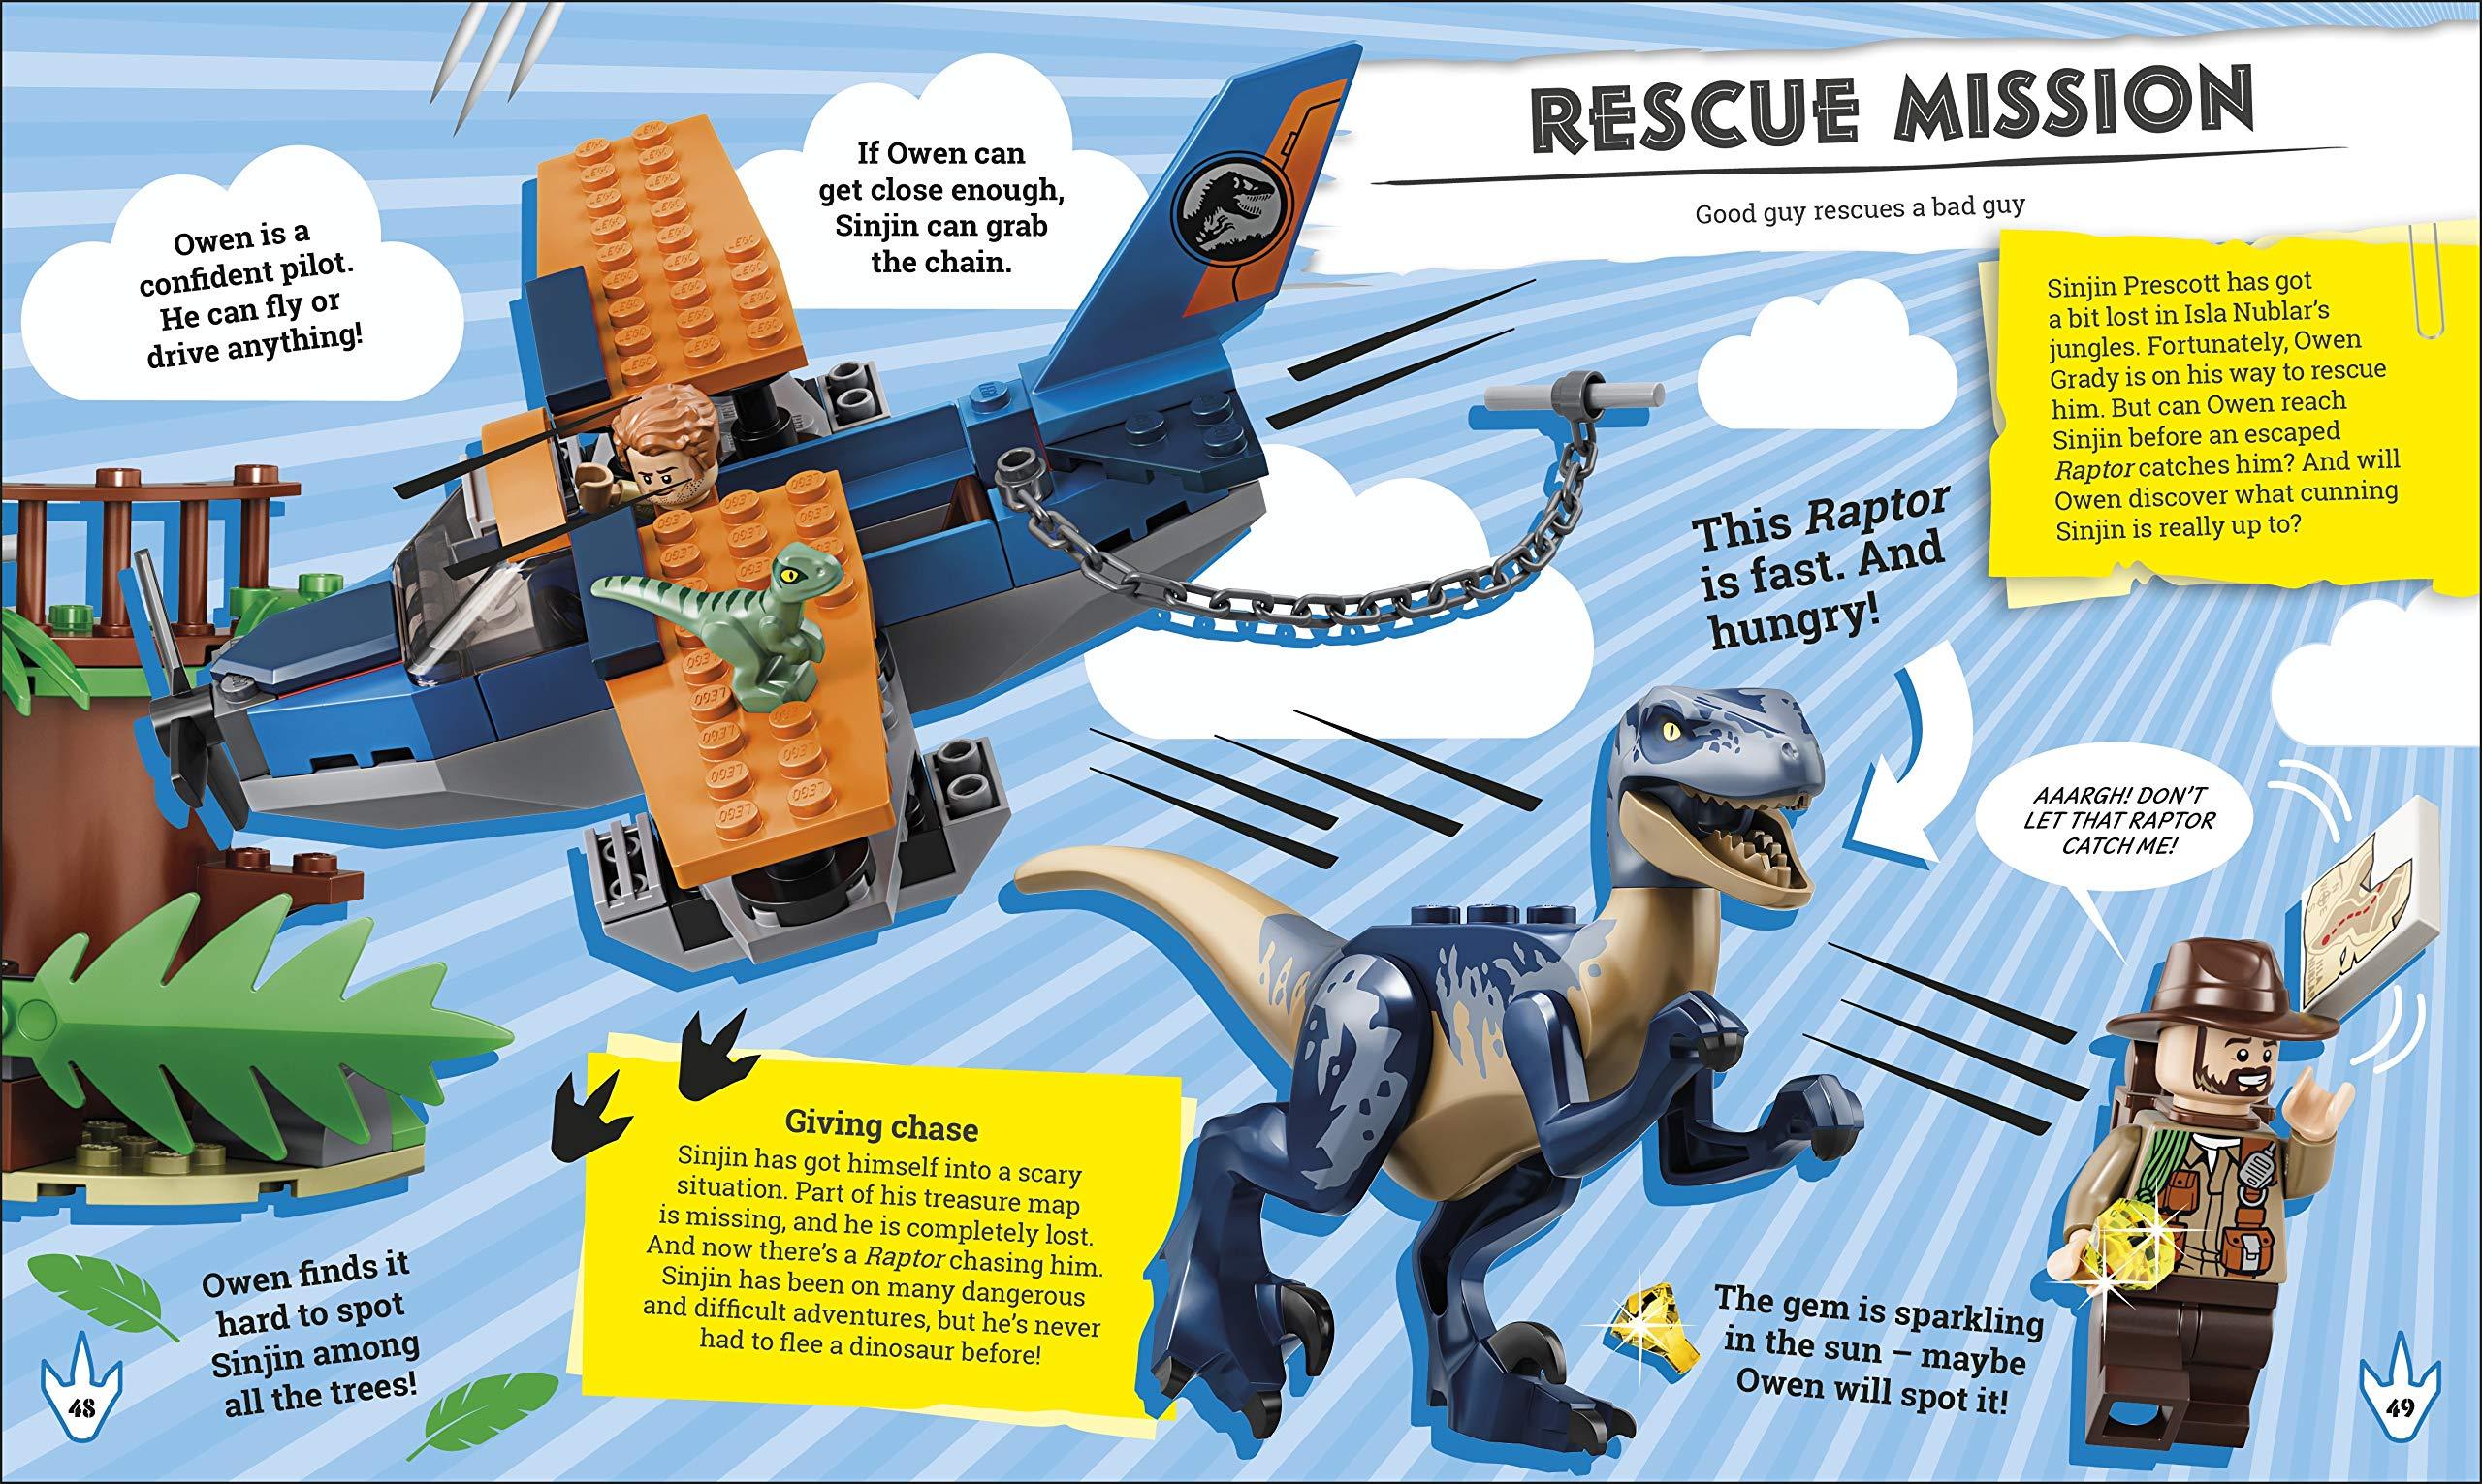 LEGO Jurassic World The Dino Files: With LEGO Jurassic World Claire Minifigure And Baby Raptor!